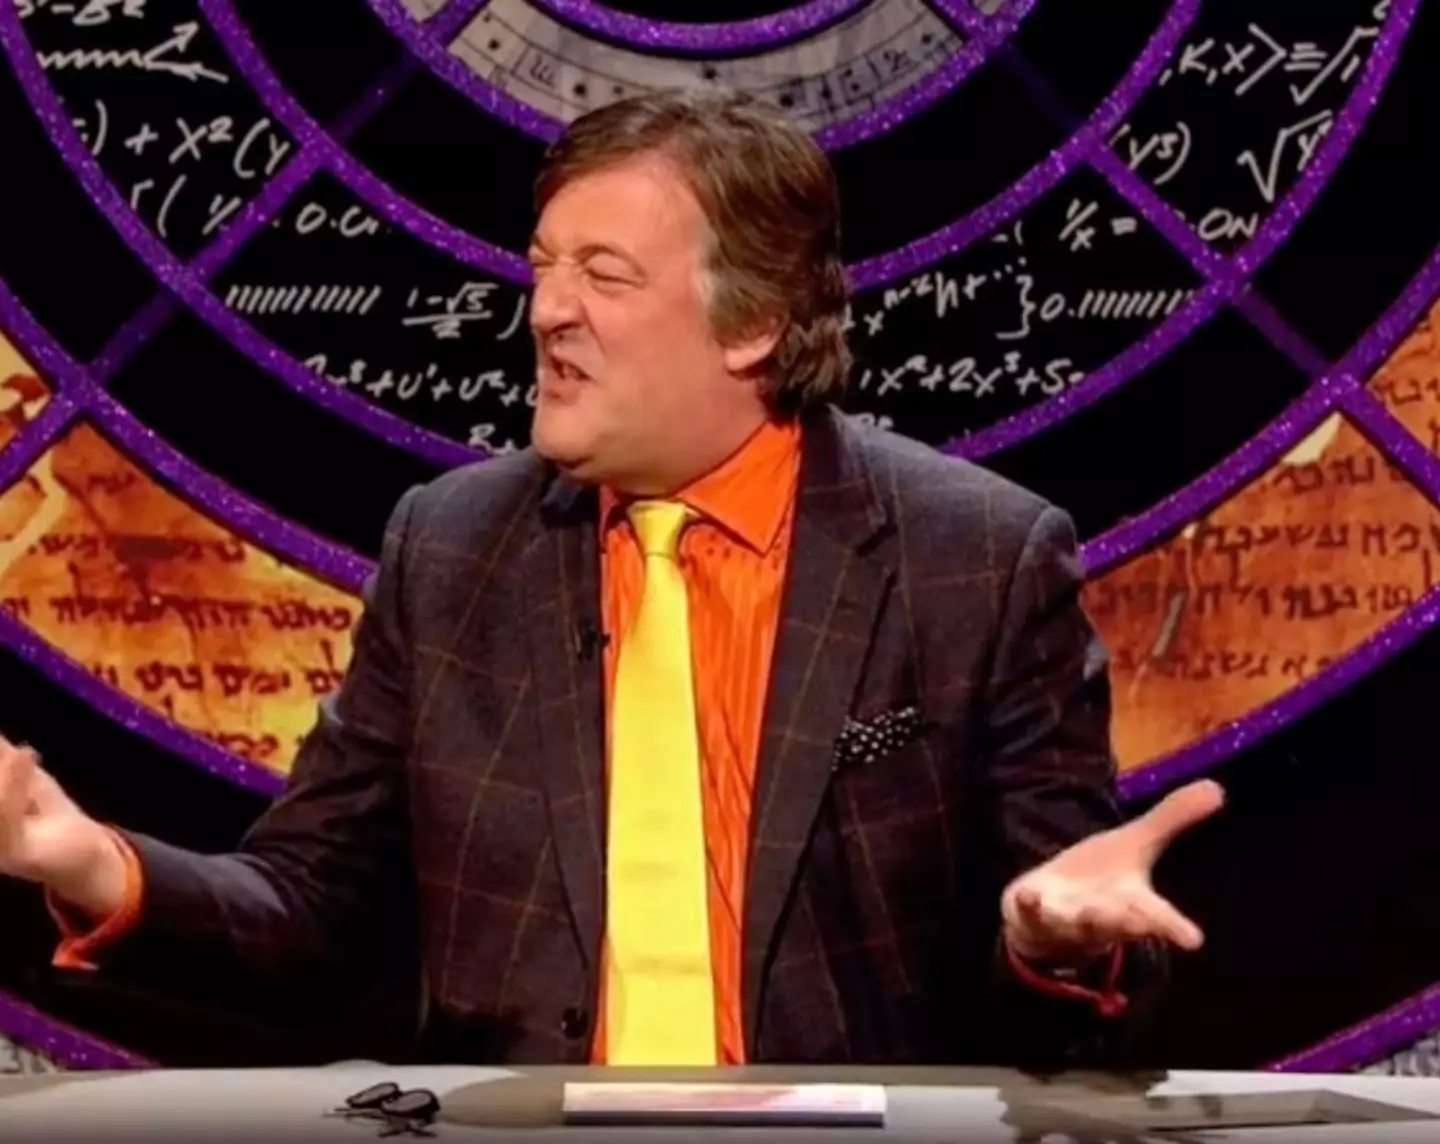 Stephen Fry knew exactly what people use the 'spare piece of card' for.